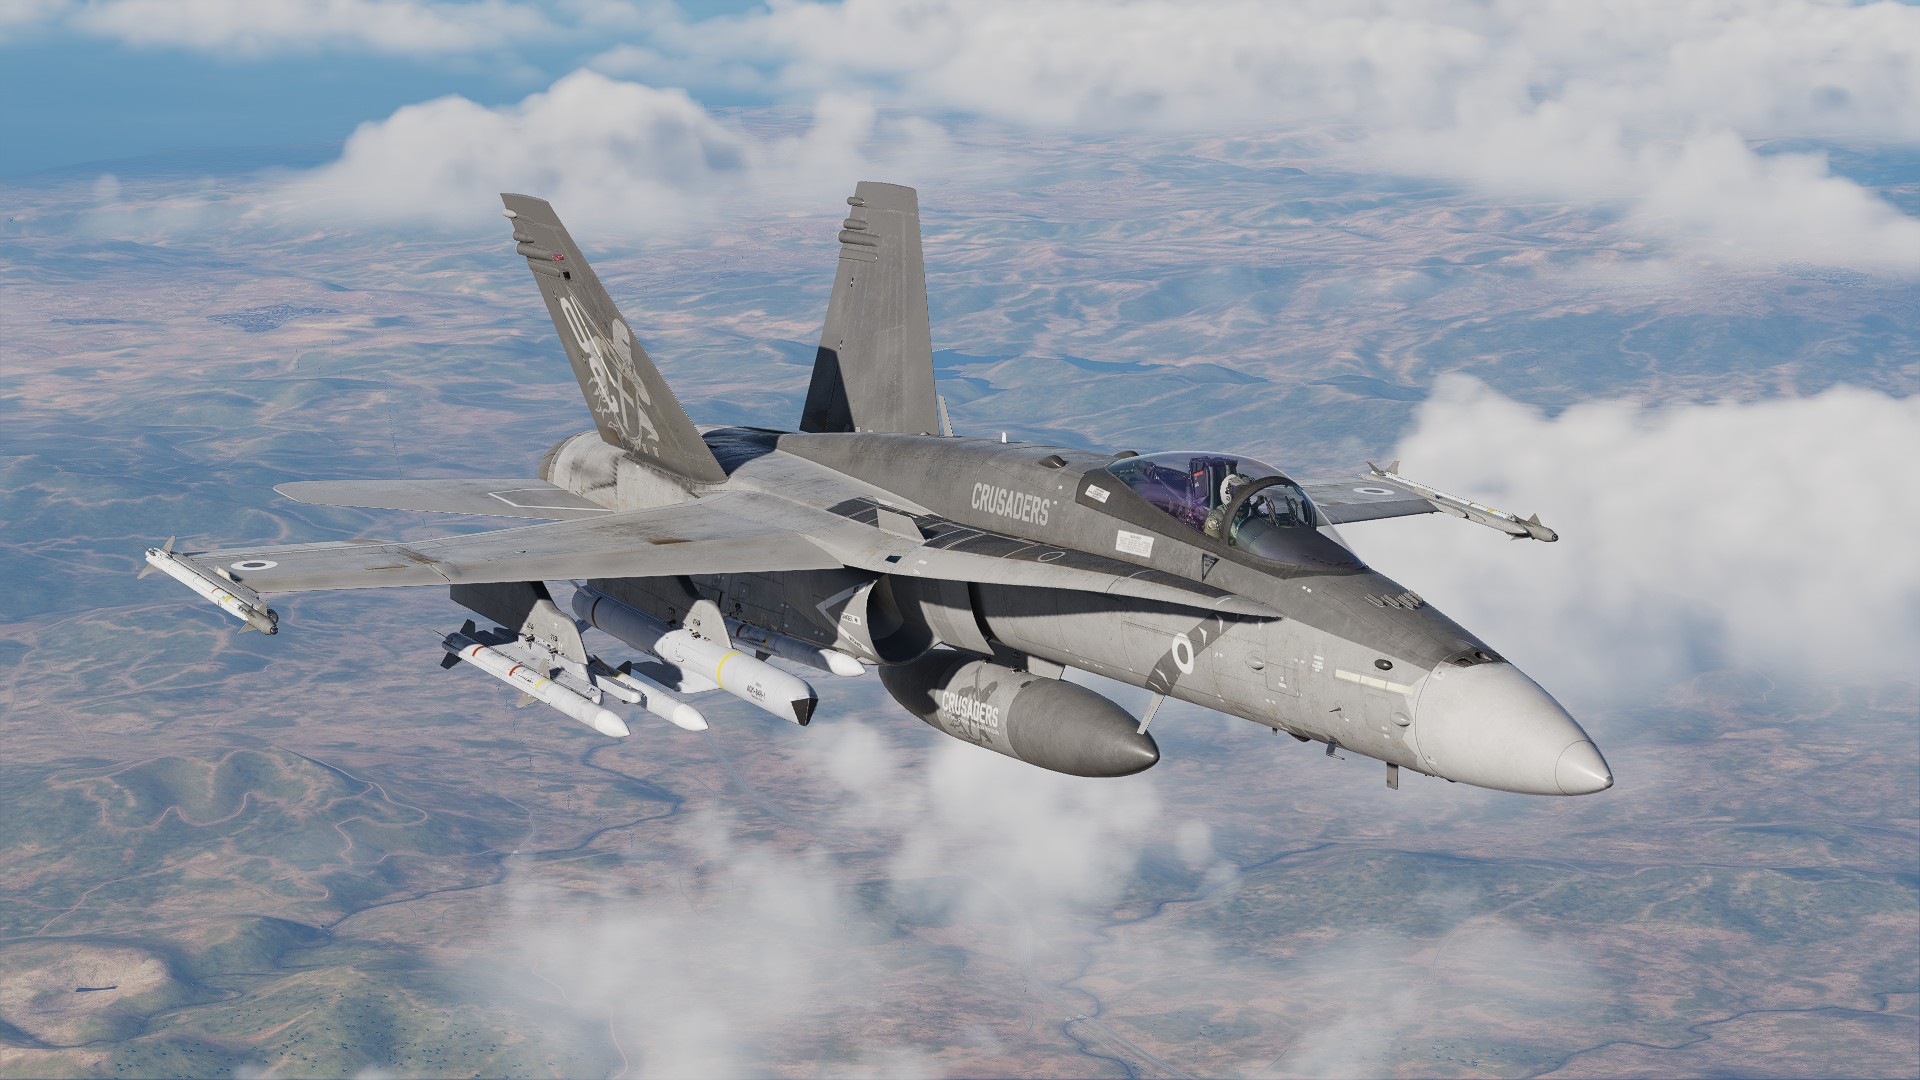 (Fictional) "Crusaders" Stealth Livery | Royal Navy & US Navy | FA-18C Hornet | By RatRanger